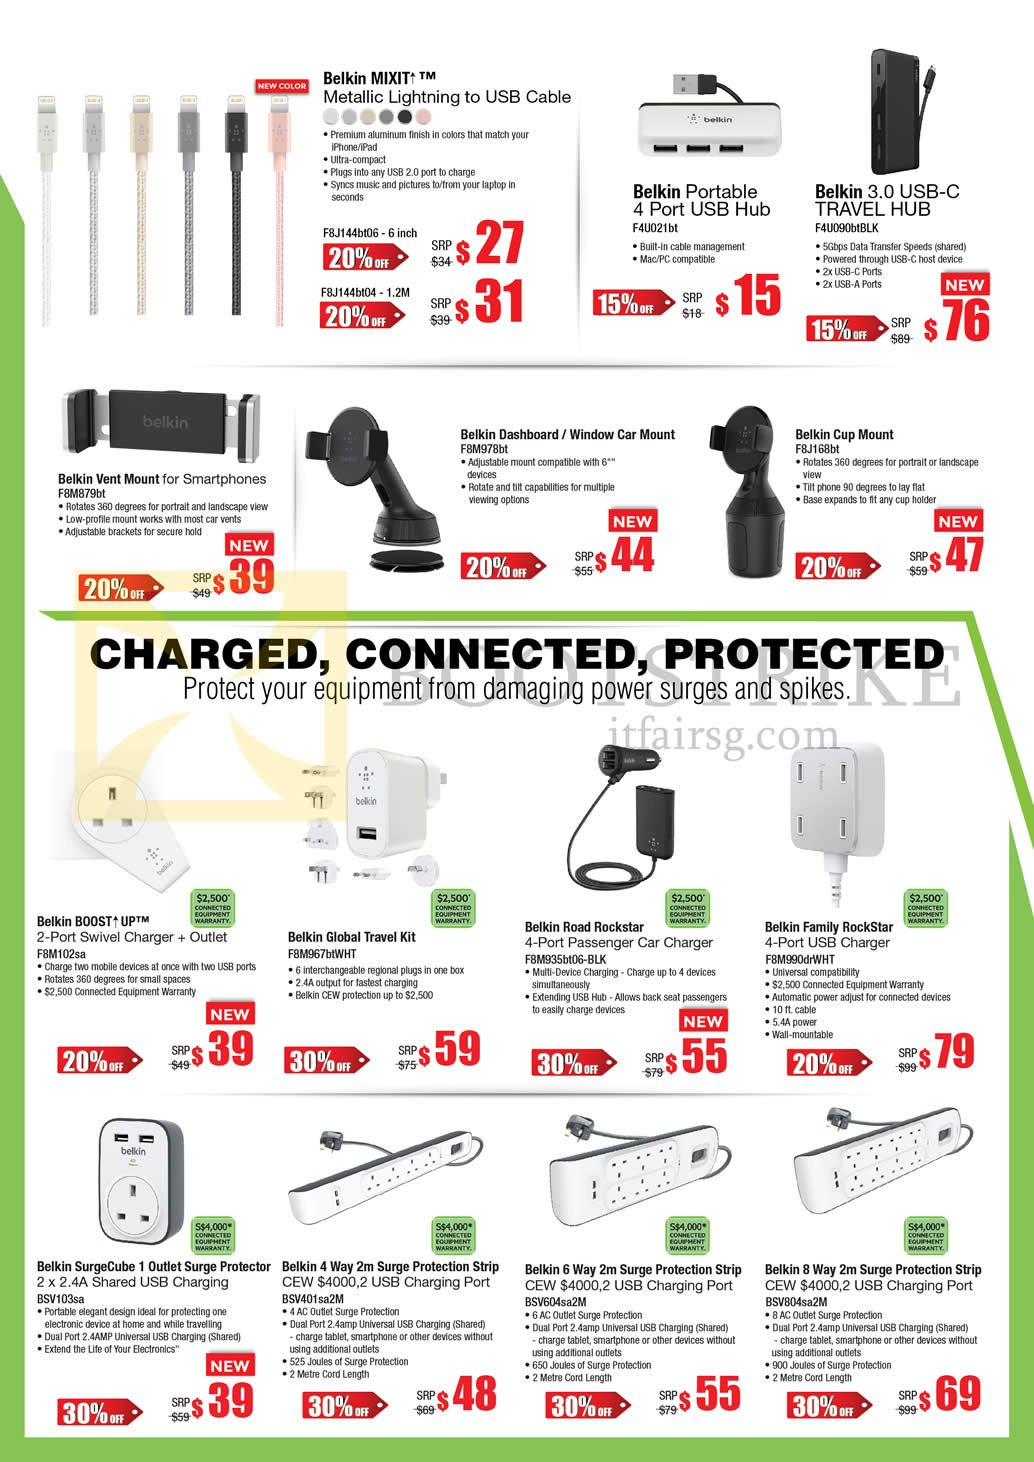 IT SHOW 2016 price list image brochure of Nubox Belkin Accessories USB Cable, USB Hub, Chargers, Charging Port, Belkin Mixit, Boost Up, Road Rockstar, Family RockStar, SurgeCube 1 Outlet